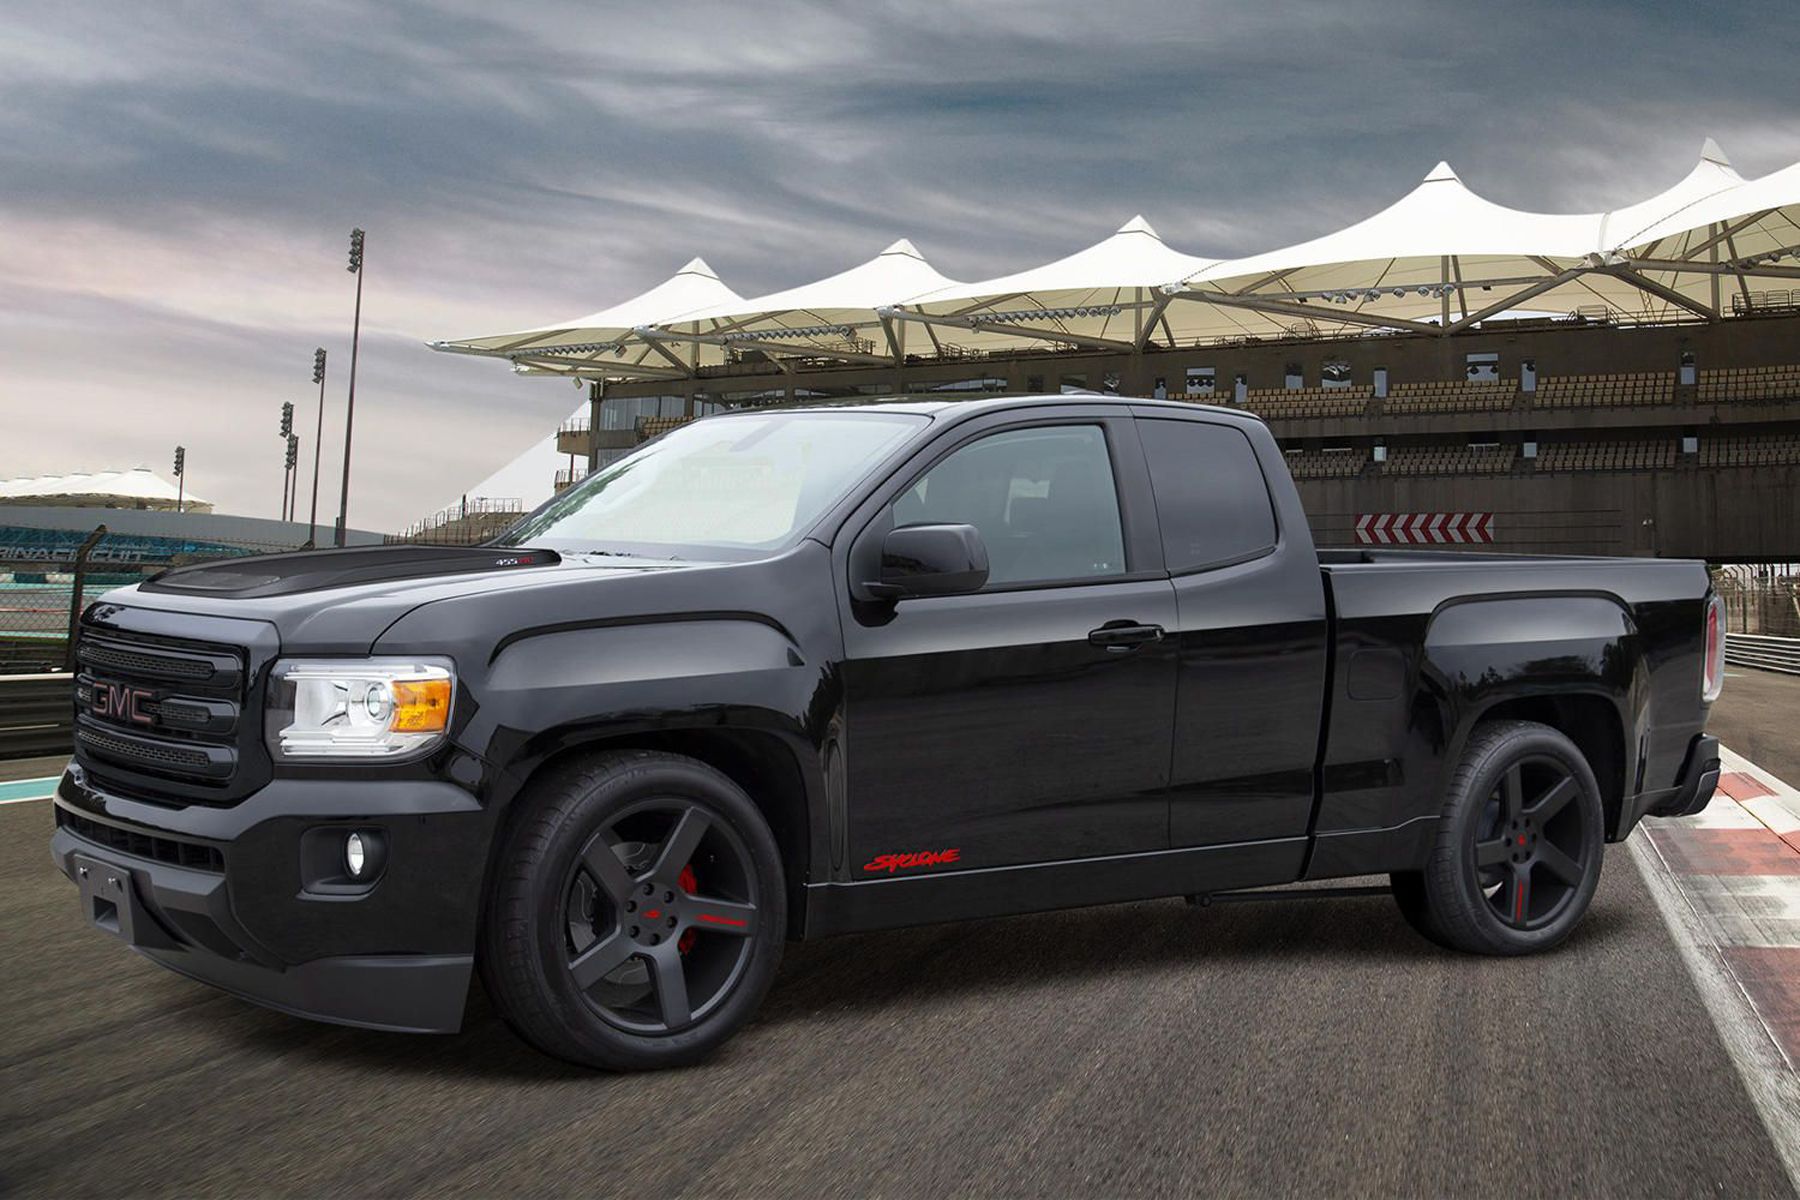 This tuner is building 100 new GMC 'Syclone' trucks with 455 hp Driving